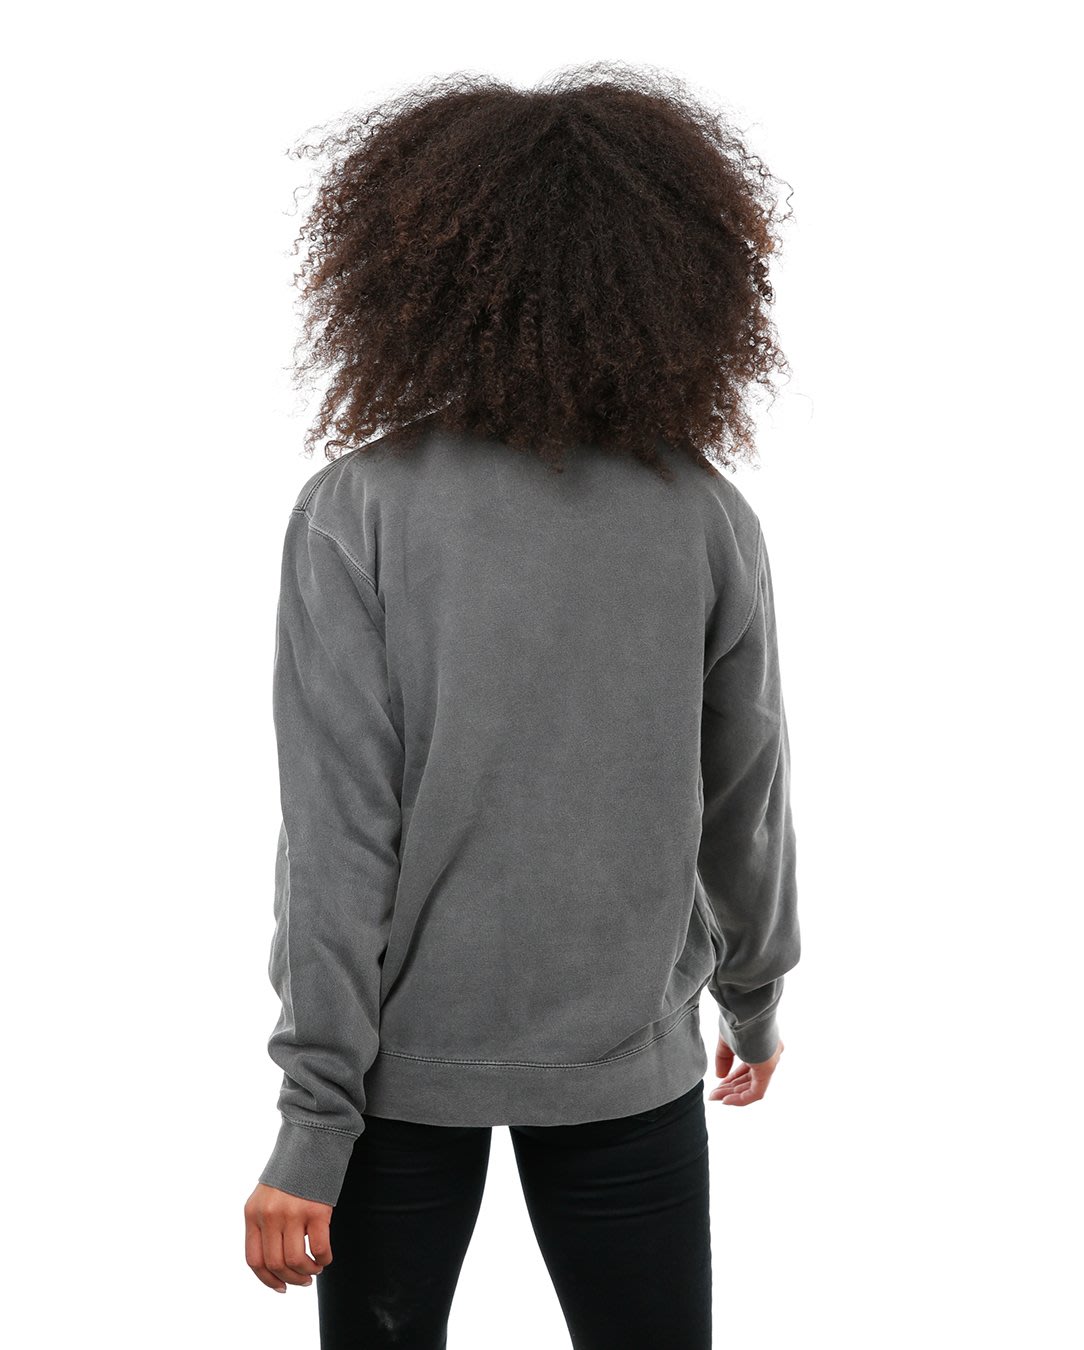 Back view of female model in Pigment Black Classic Crew Sweatshirt on white background.